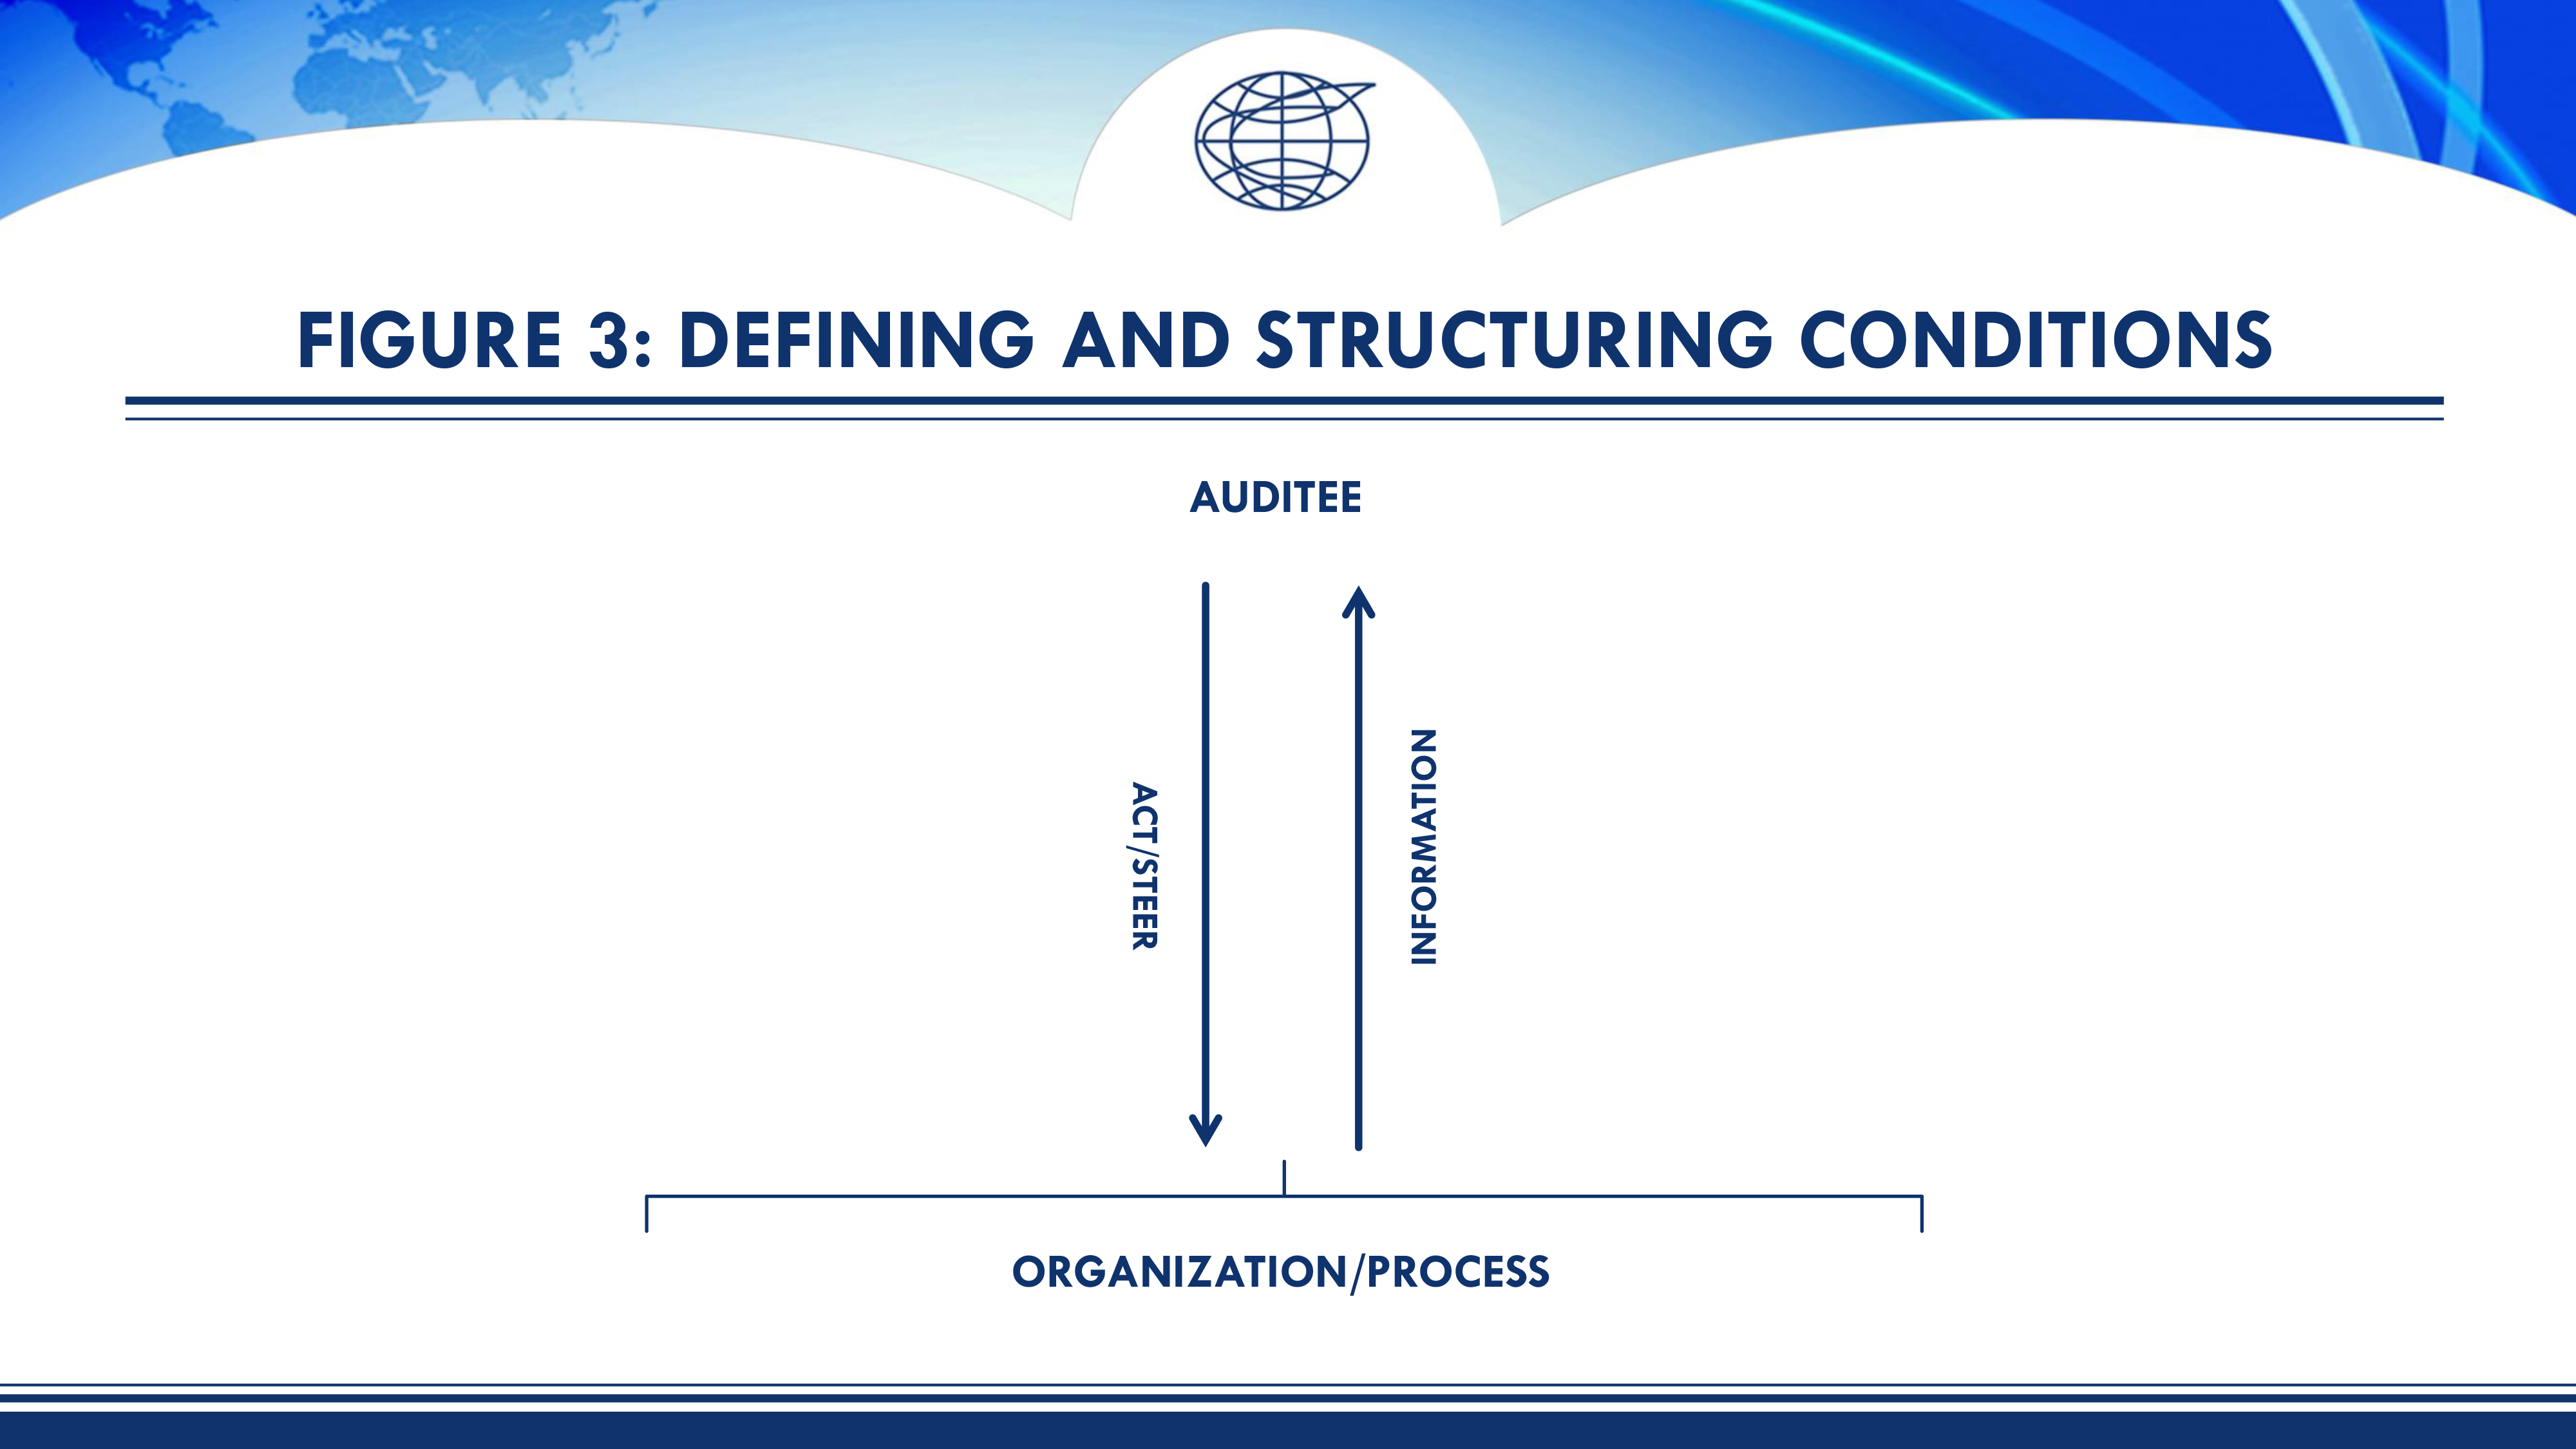 Figure 3: Defining and Structuring Conditions